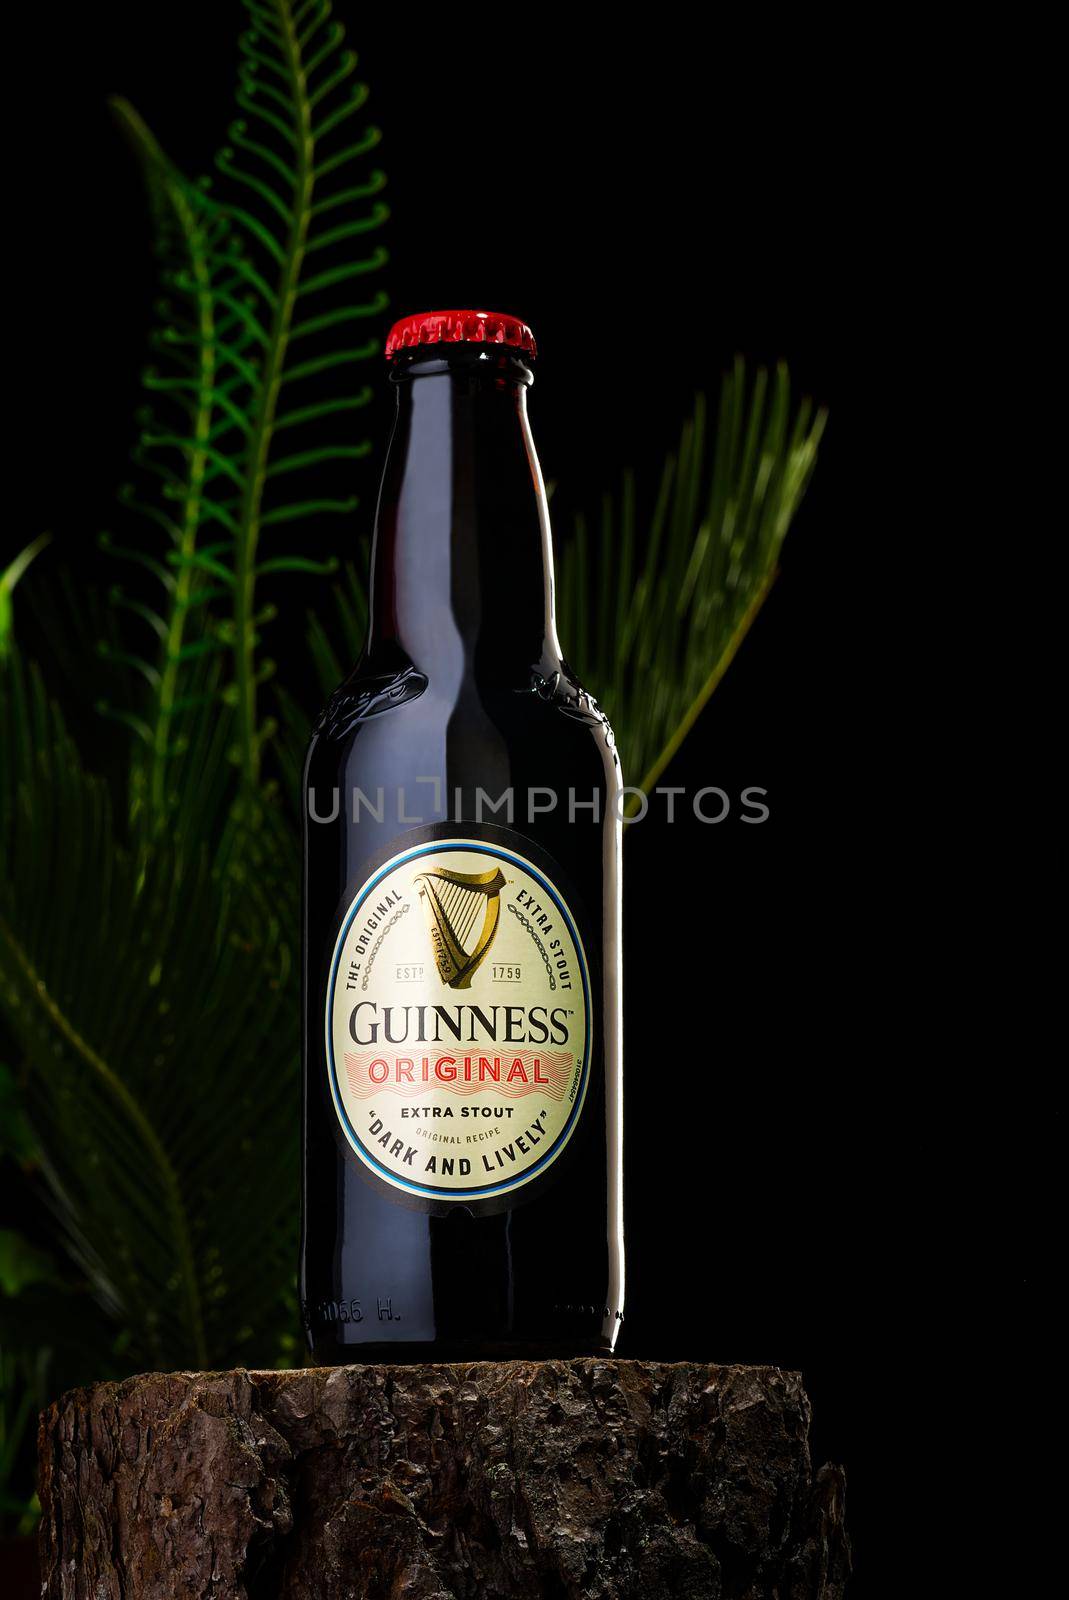 Tallinn, Estonia - March 2022: Bottle of Guinness. Guinness beer has produced since 1759 in Ireland by PhotoTime